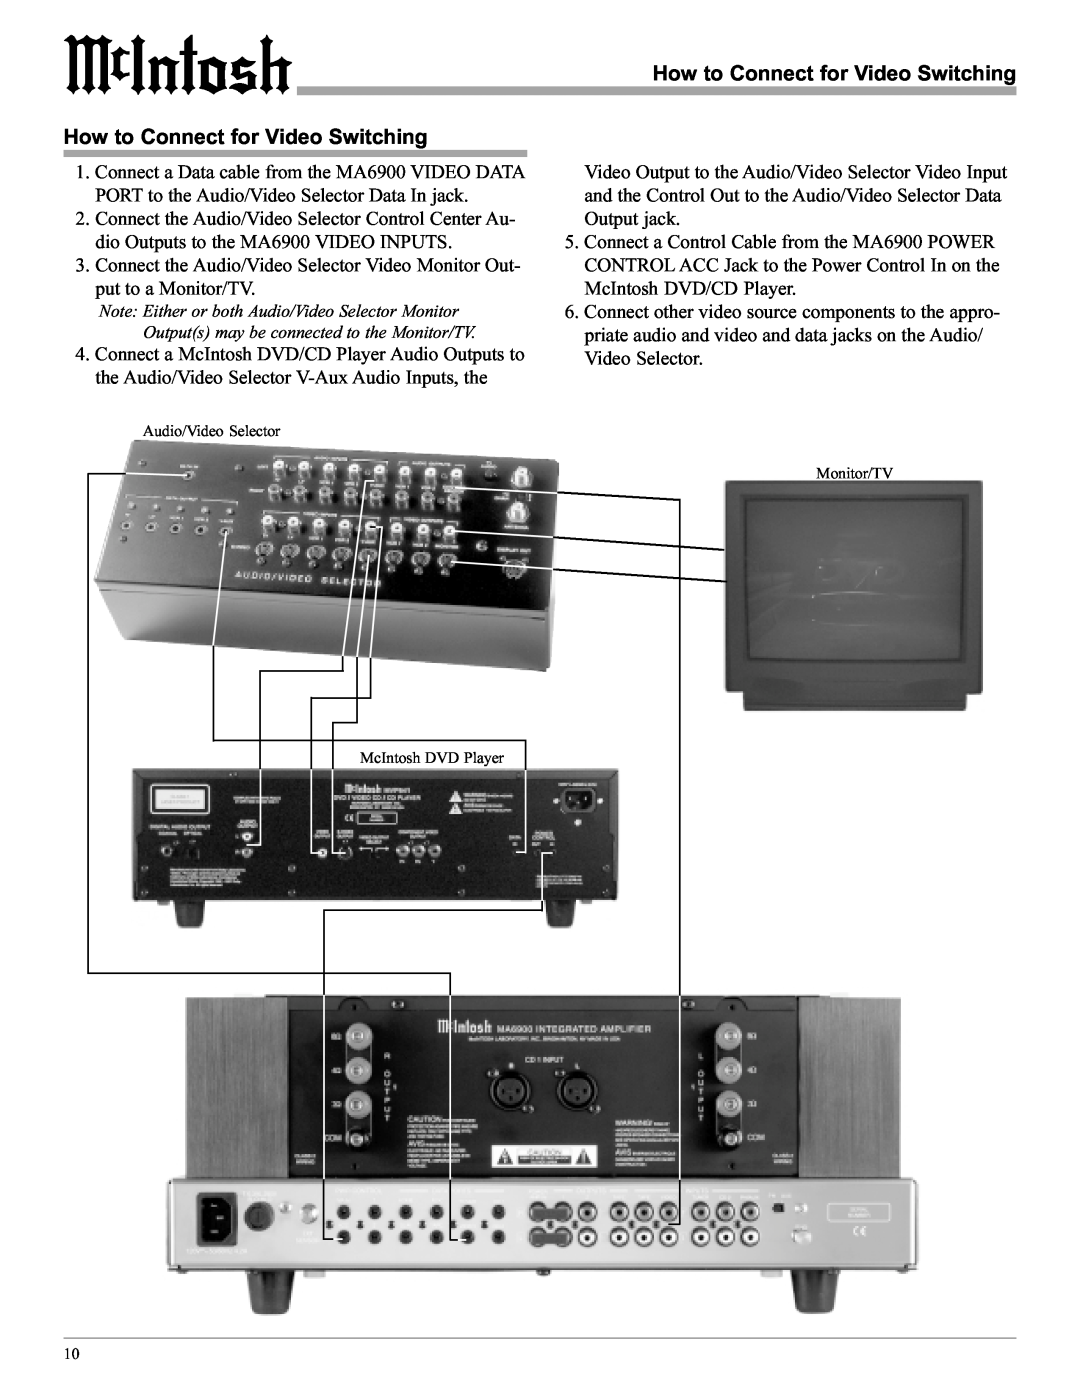 McIntosh MA6900 manual How to Connect for Video Switching, Audio/Video Selector, Monitor/TV, McIntosh DVD Player 